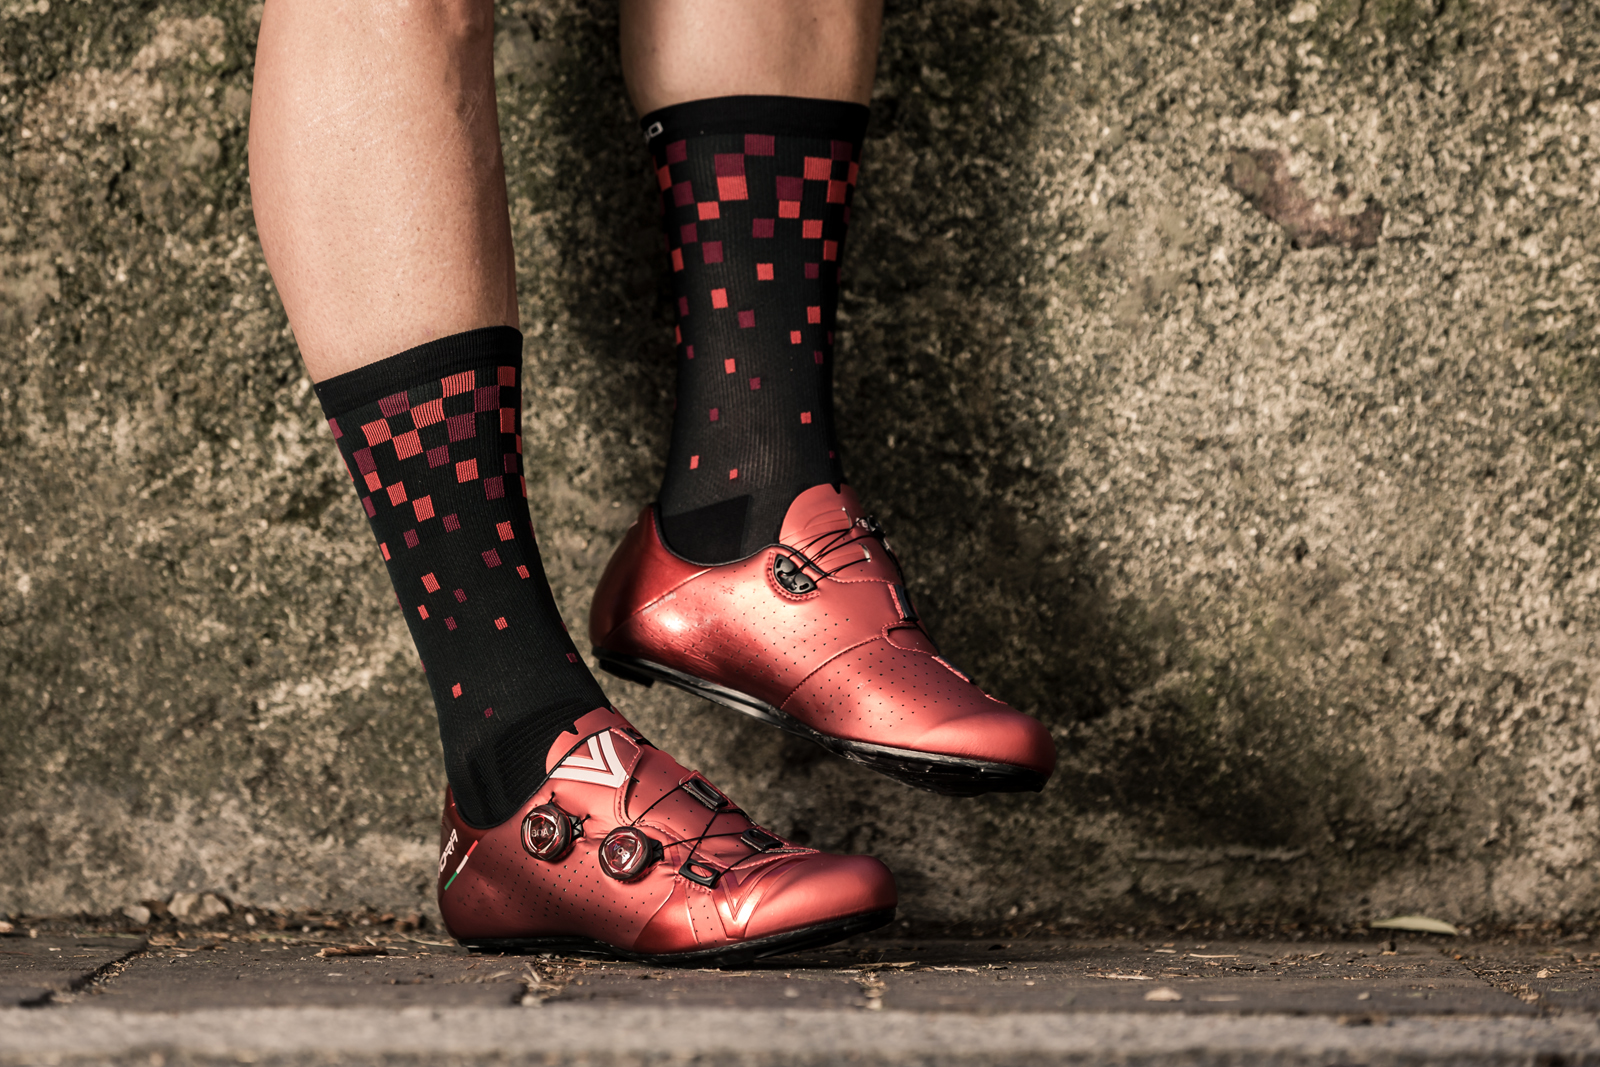 Oxeego - PIXELS - Cycling socks